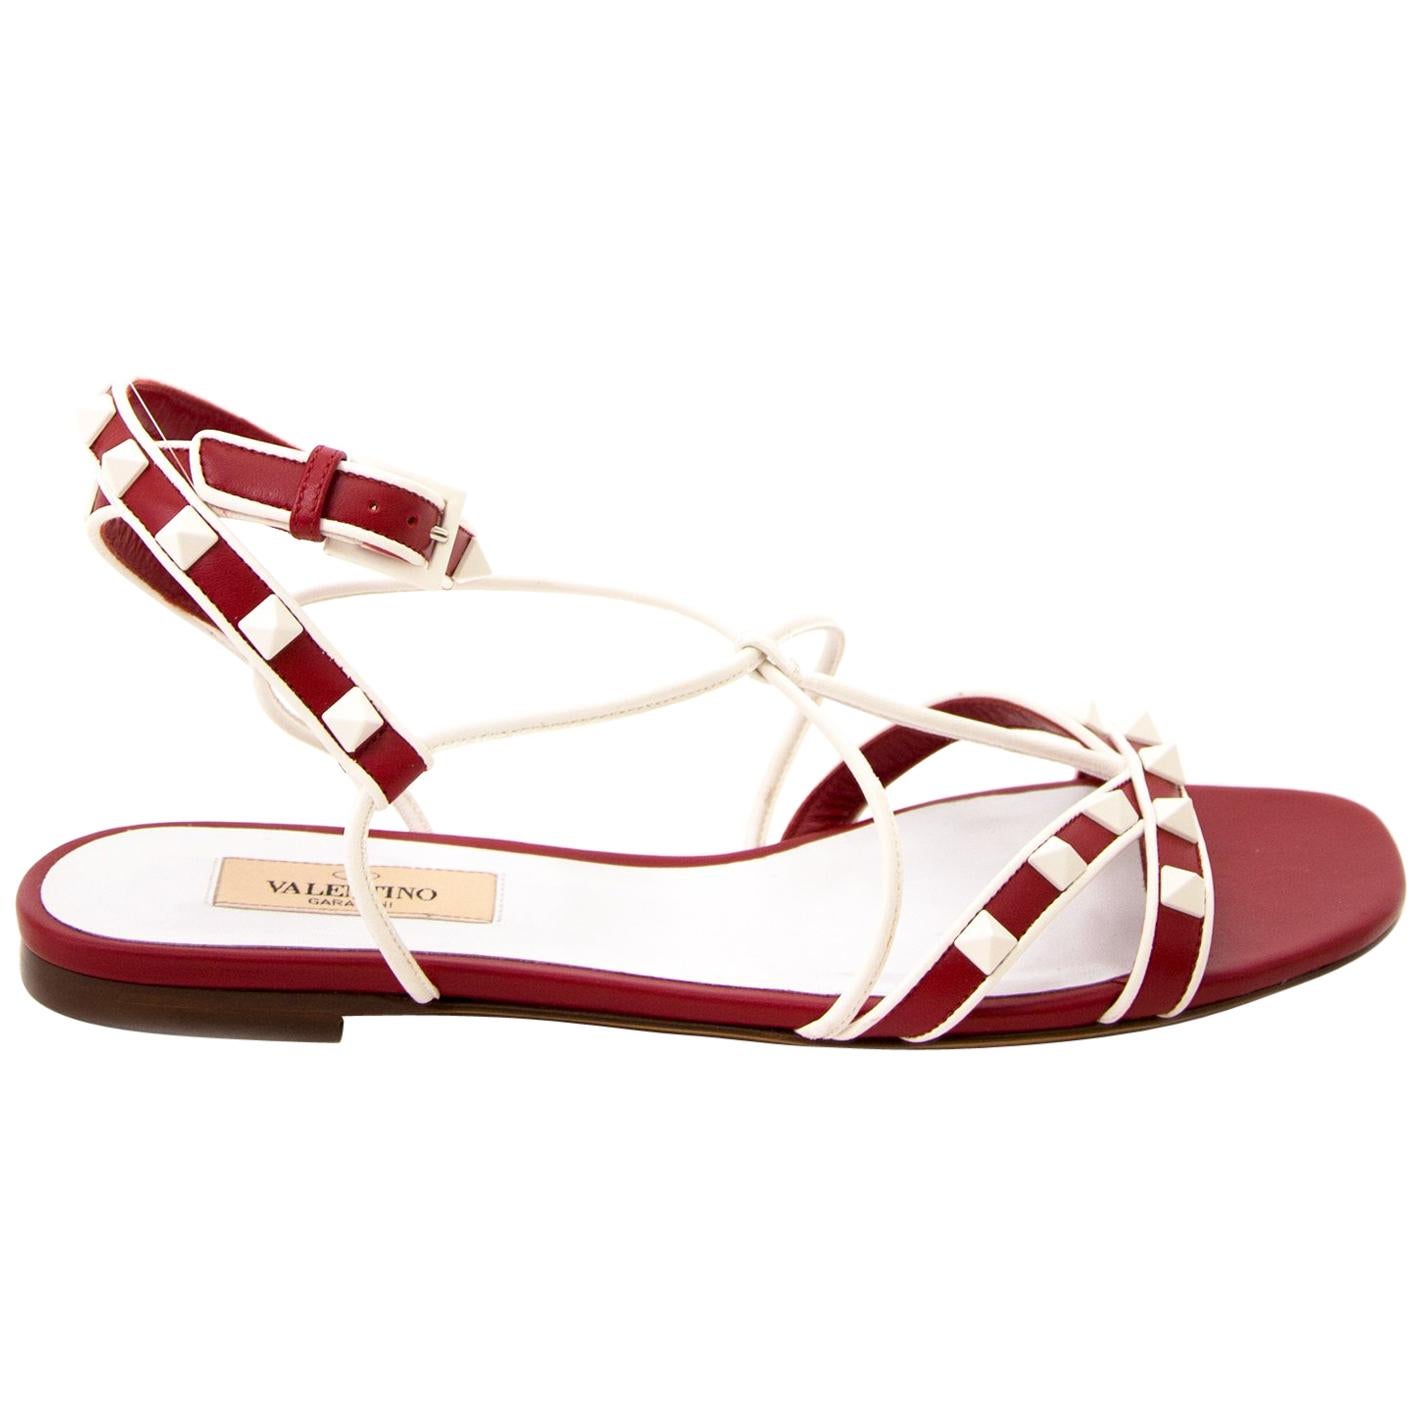 Valentino Red And White Rockstud Sandals - Size 37.5 For Sale